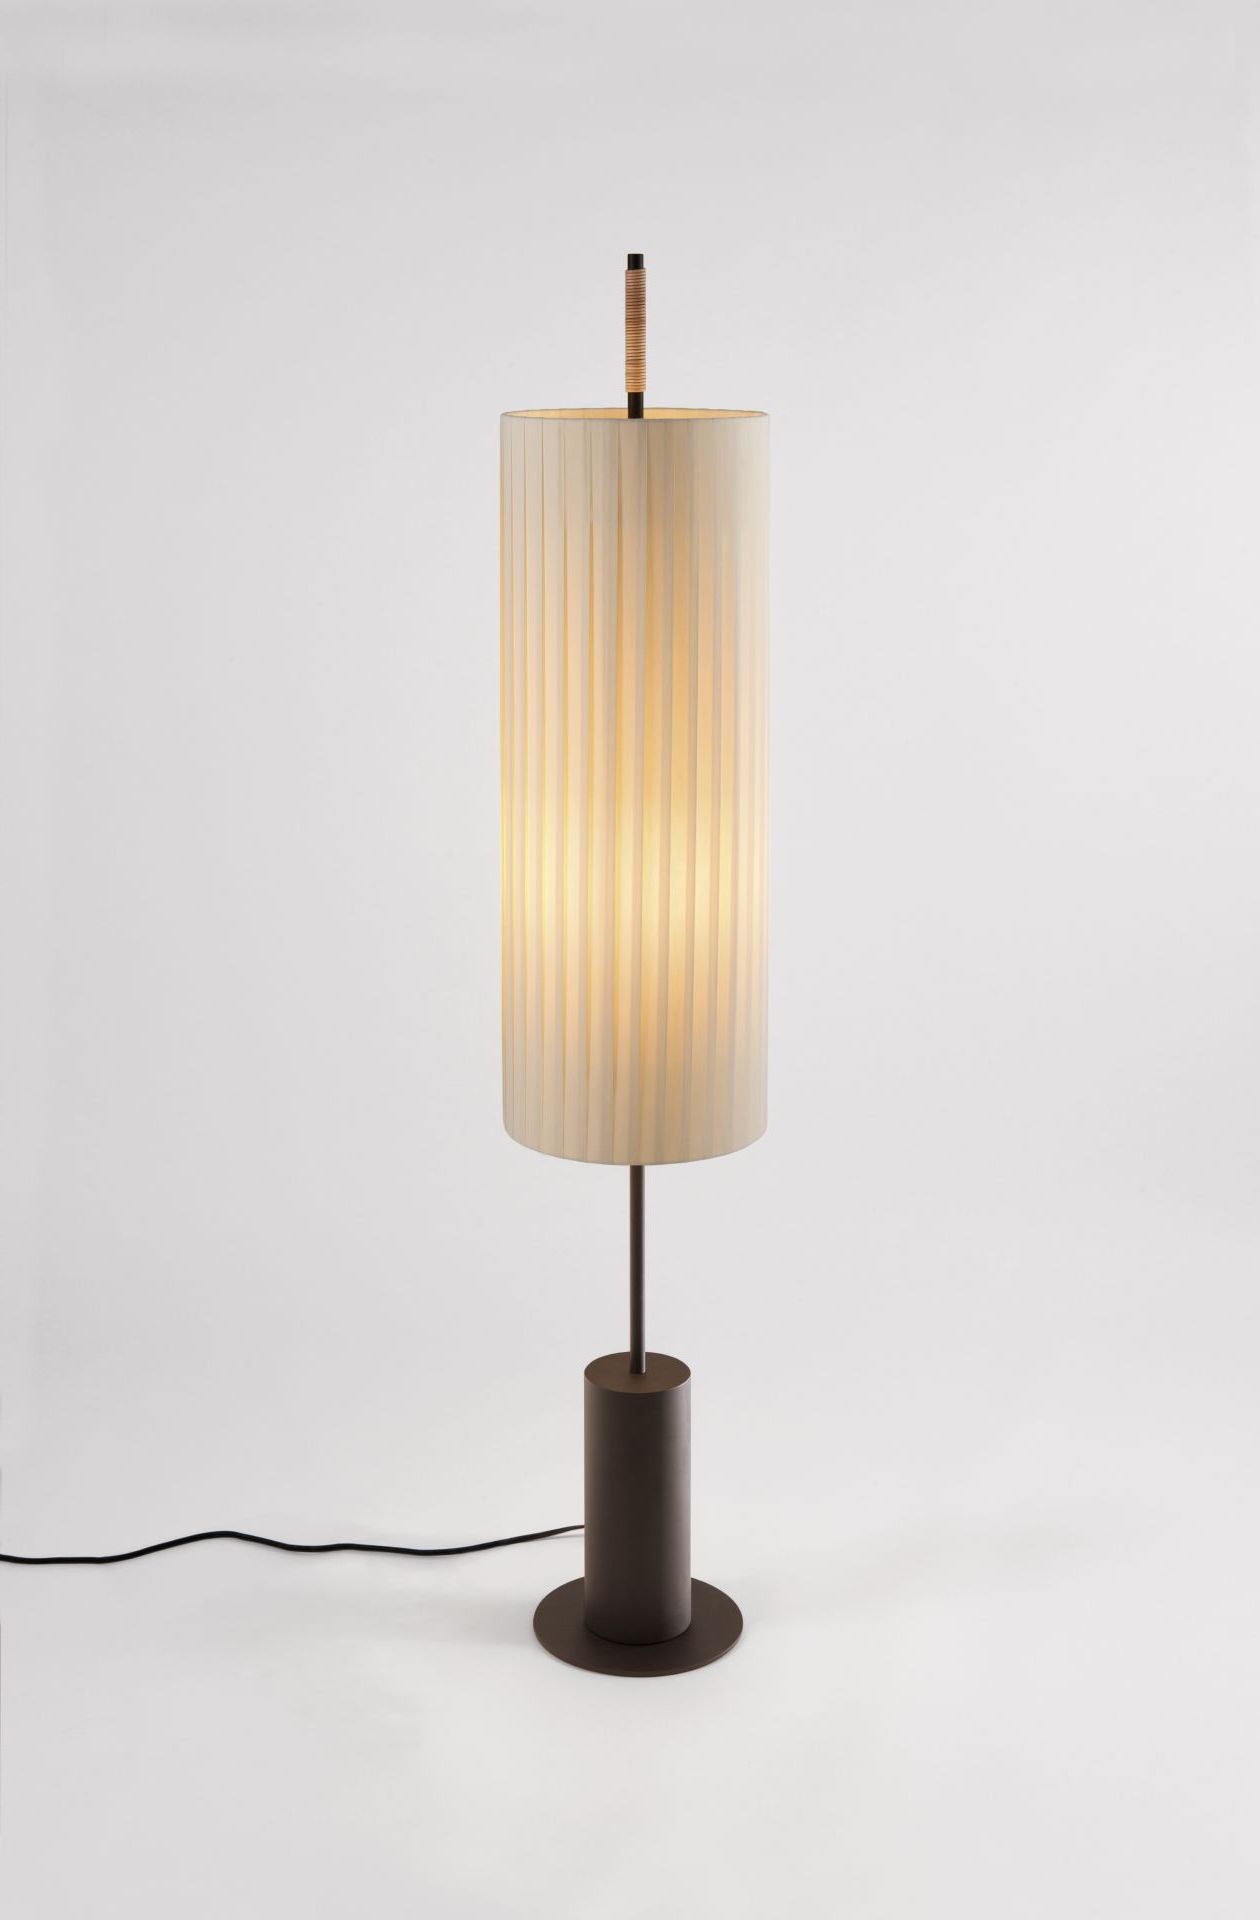 Dorica Stehleuchte Santa & Cole Pertaining To Cylinder Floor Lamps (Gallery 19 of 20)